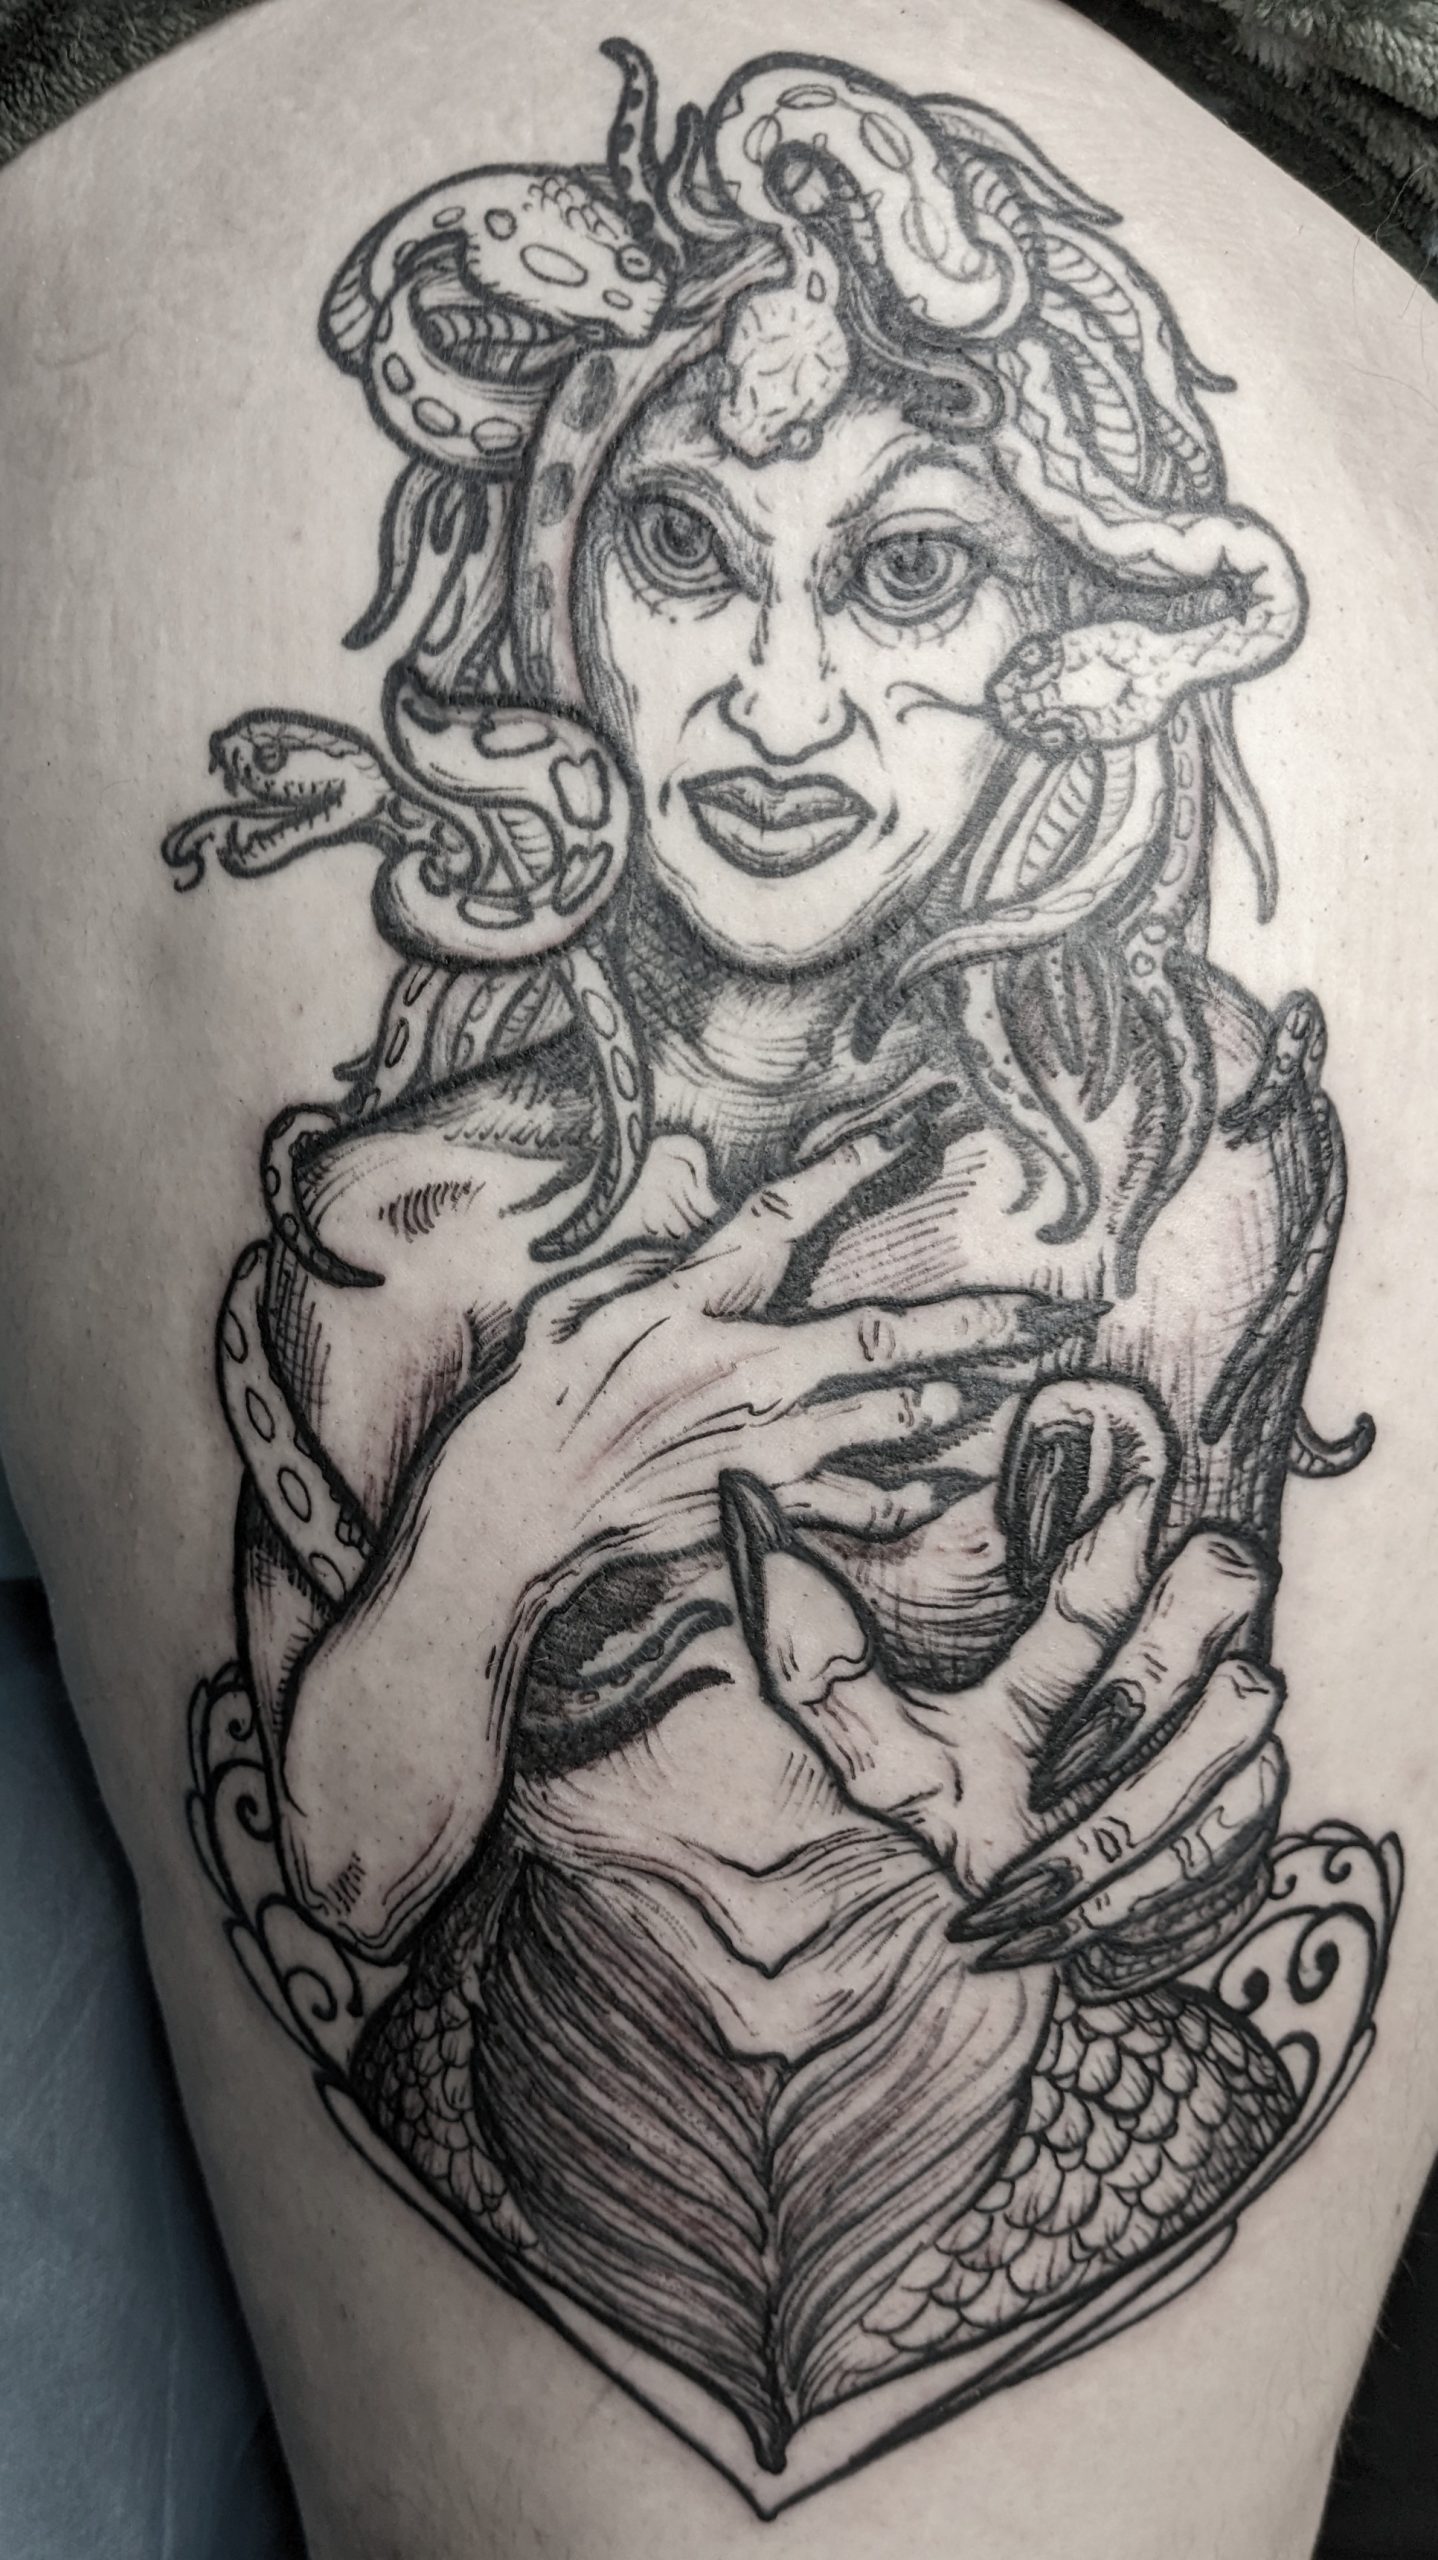 a tattoo that looks like an engraving of a non sexual Medusa reaching out her hand with an angry smile